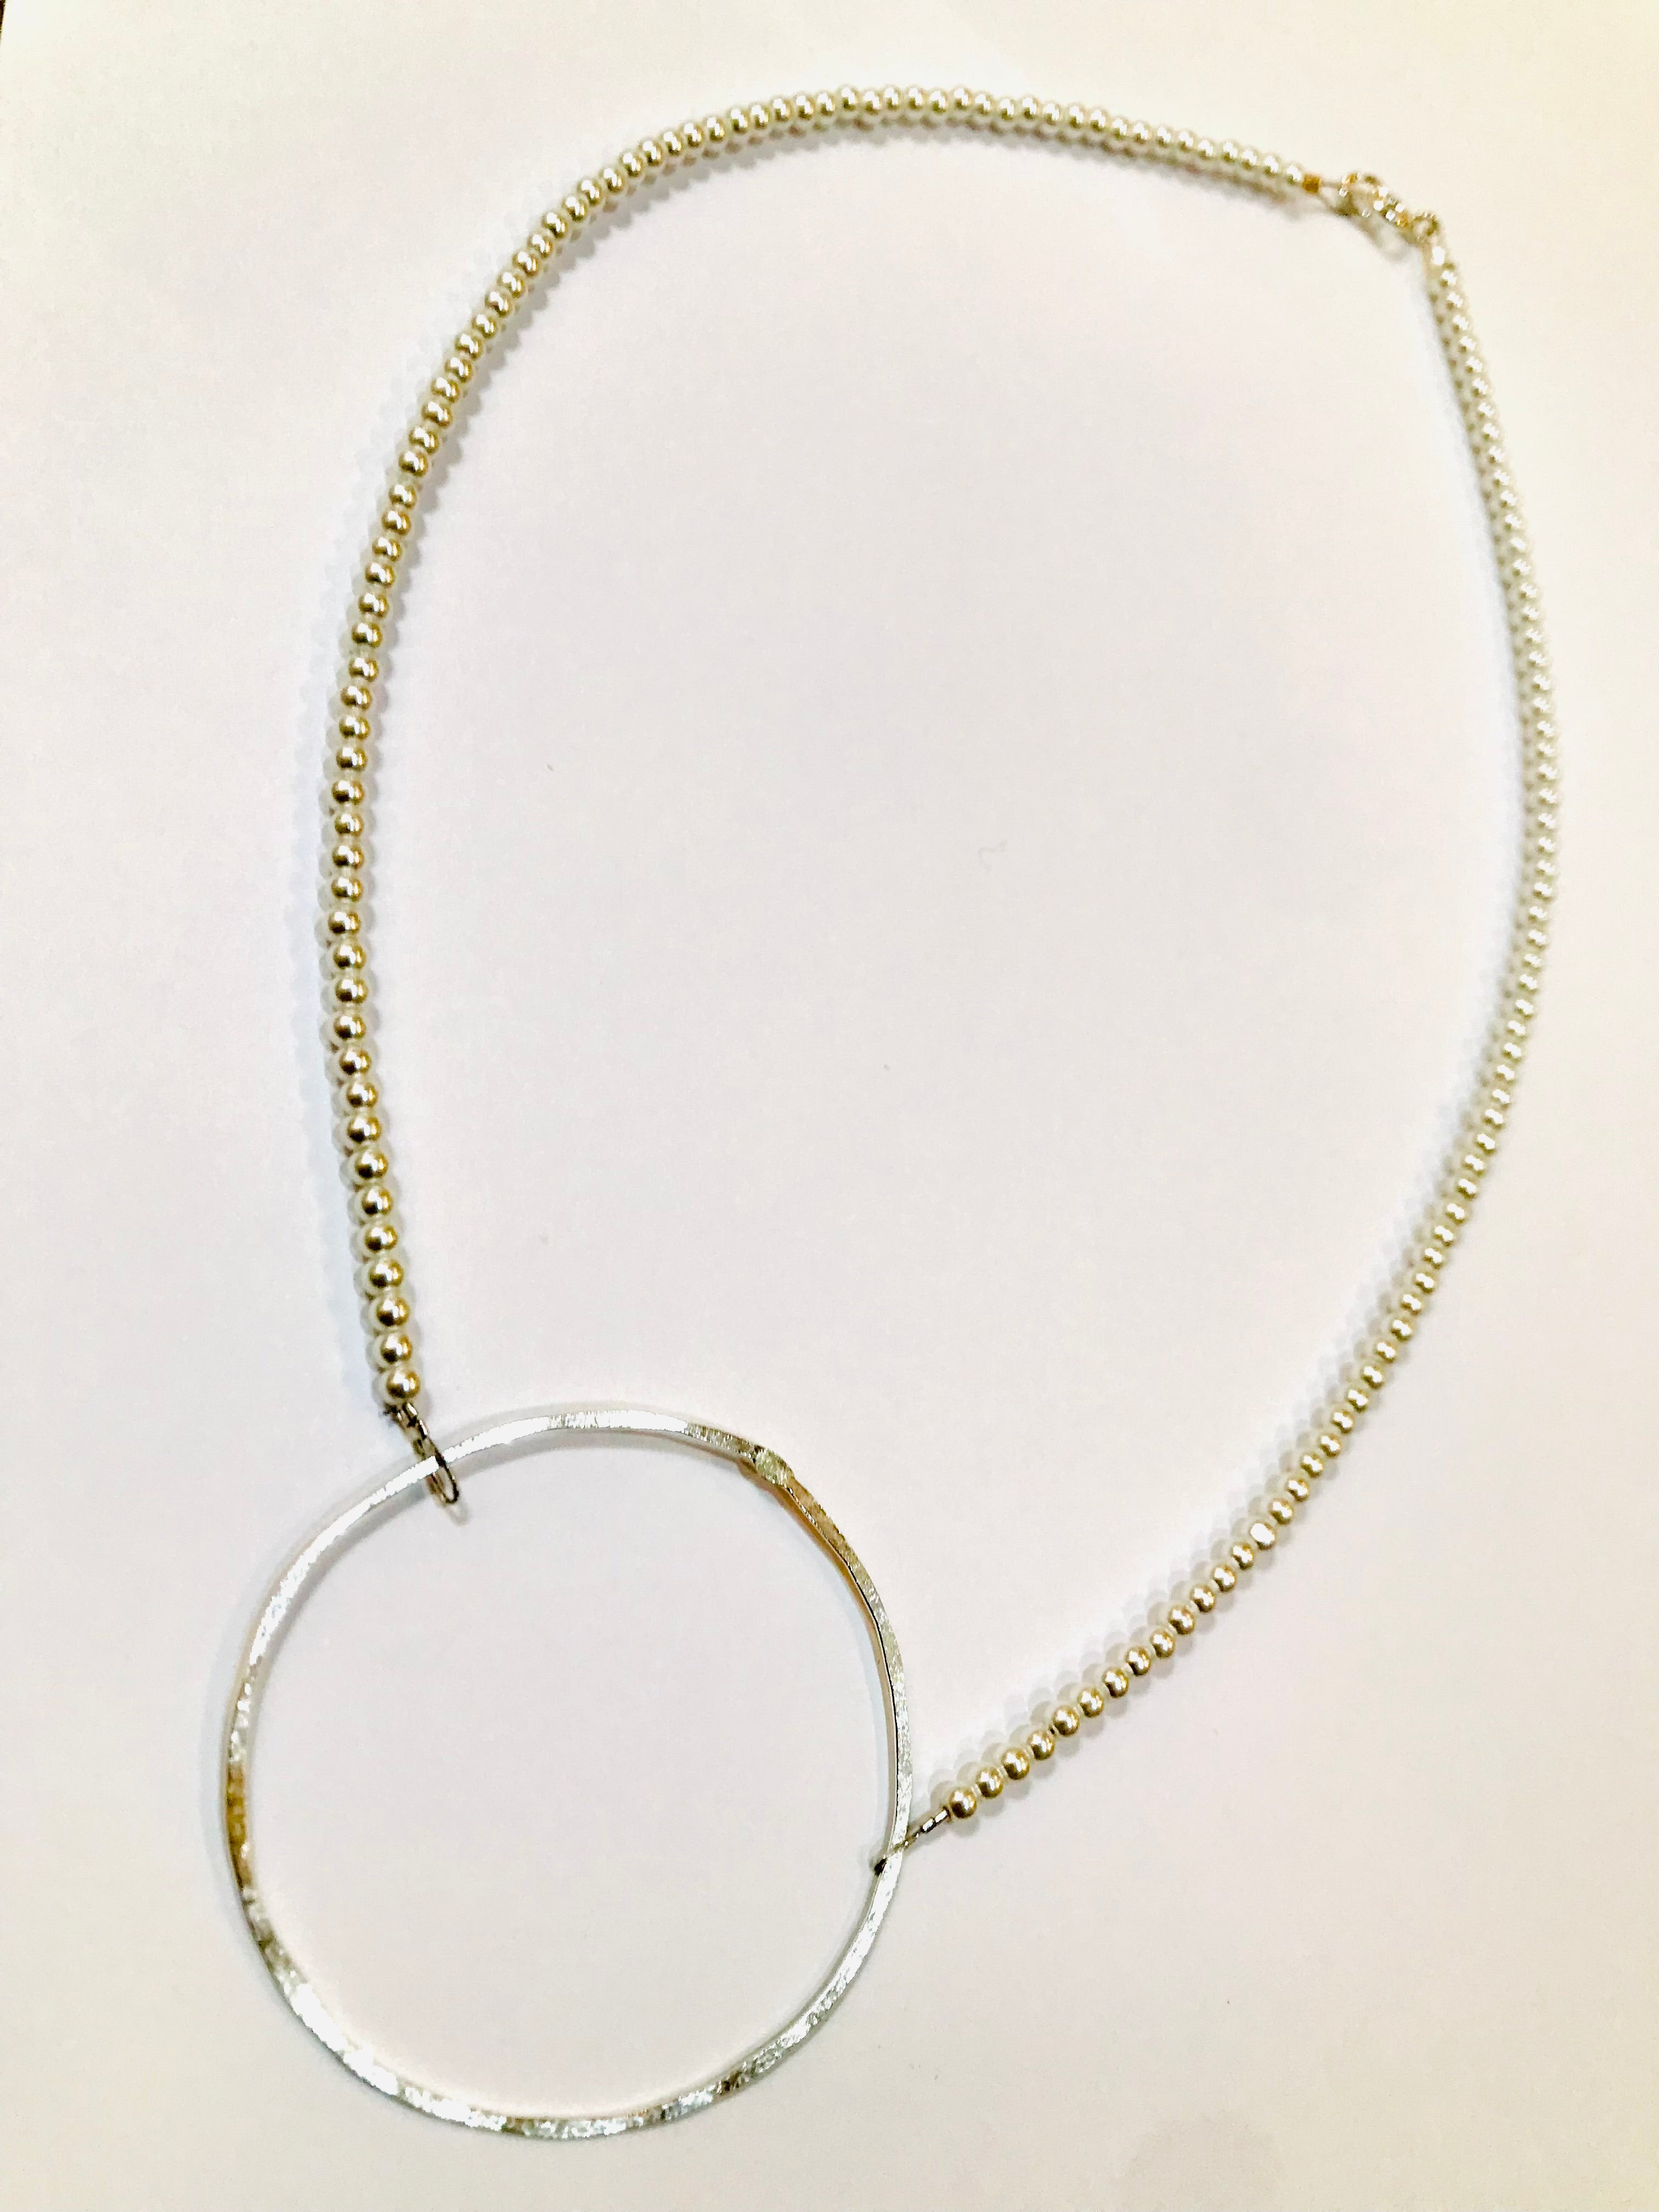 Silver Hoop And Stone Necklace - The Nancy Smillie Shop - Art, Jewellery & Designer Gifts Glasgow